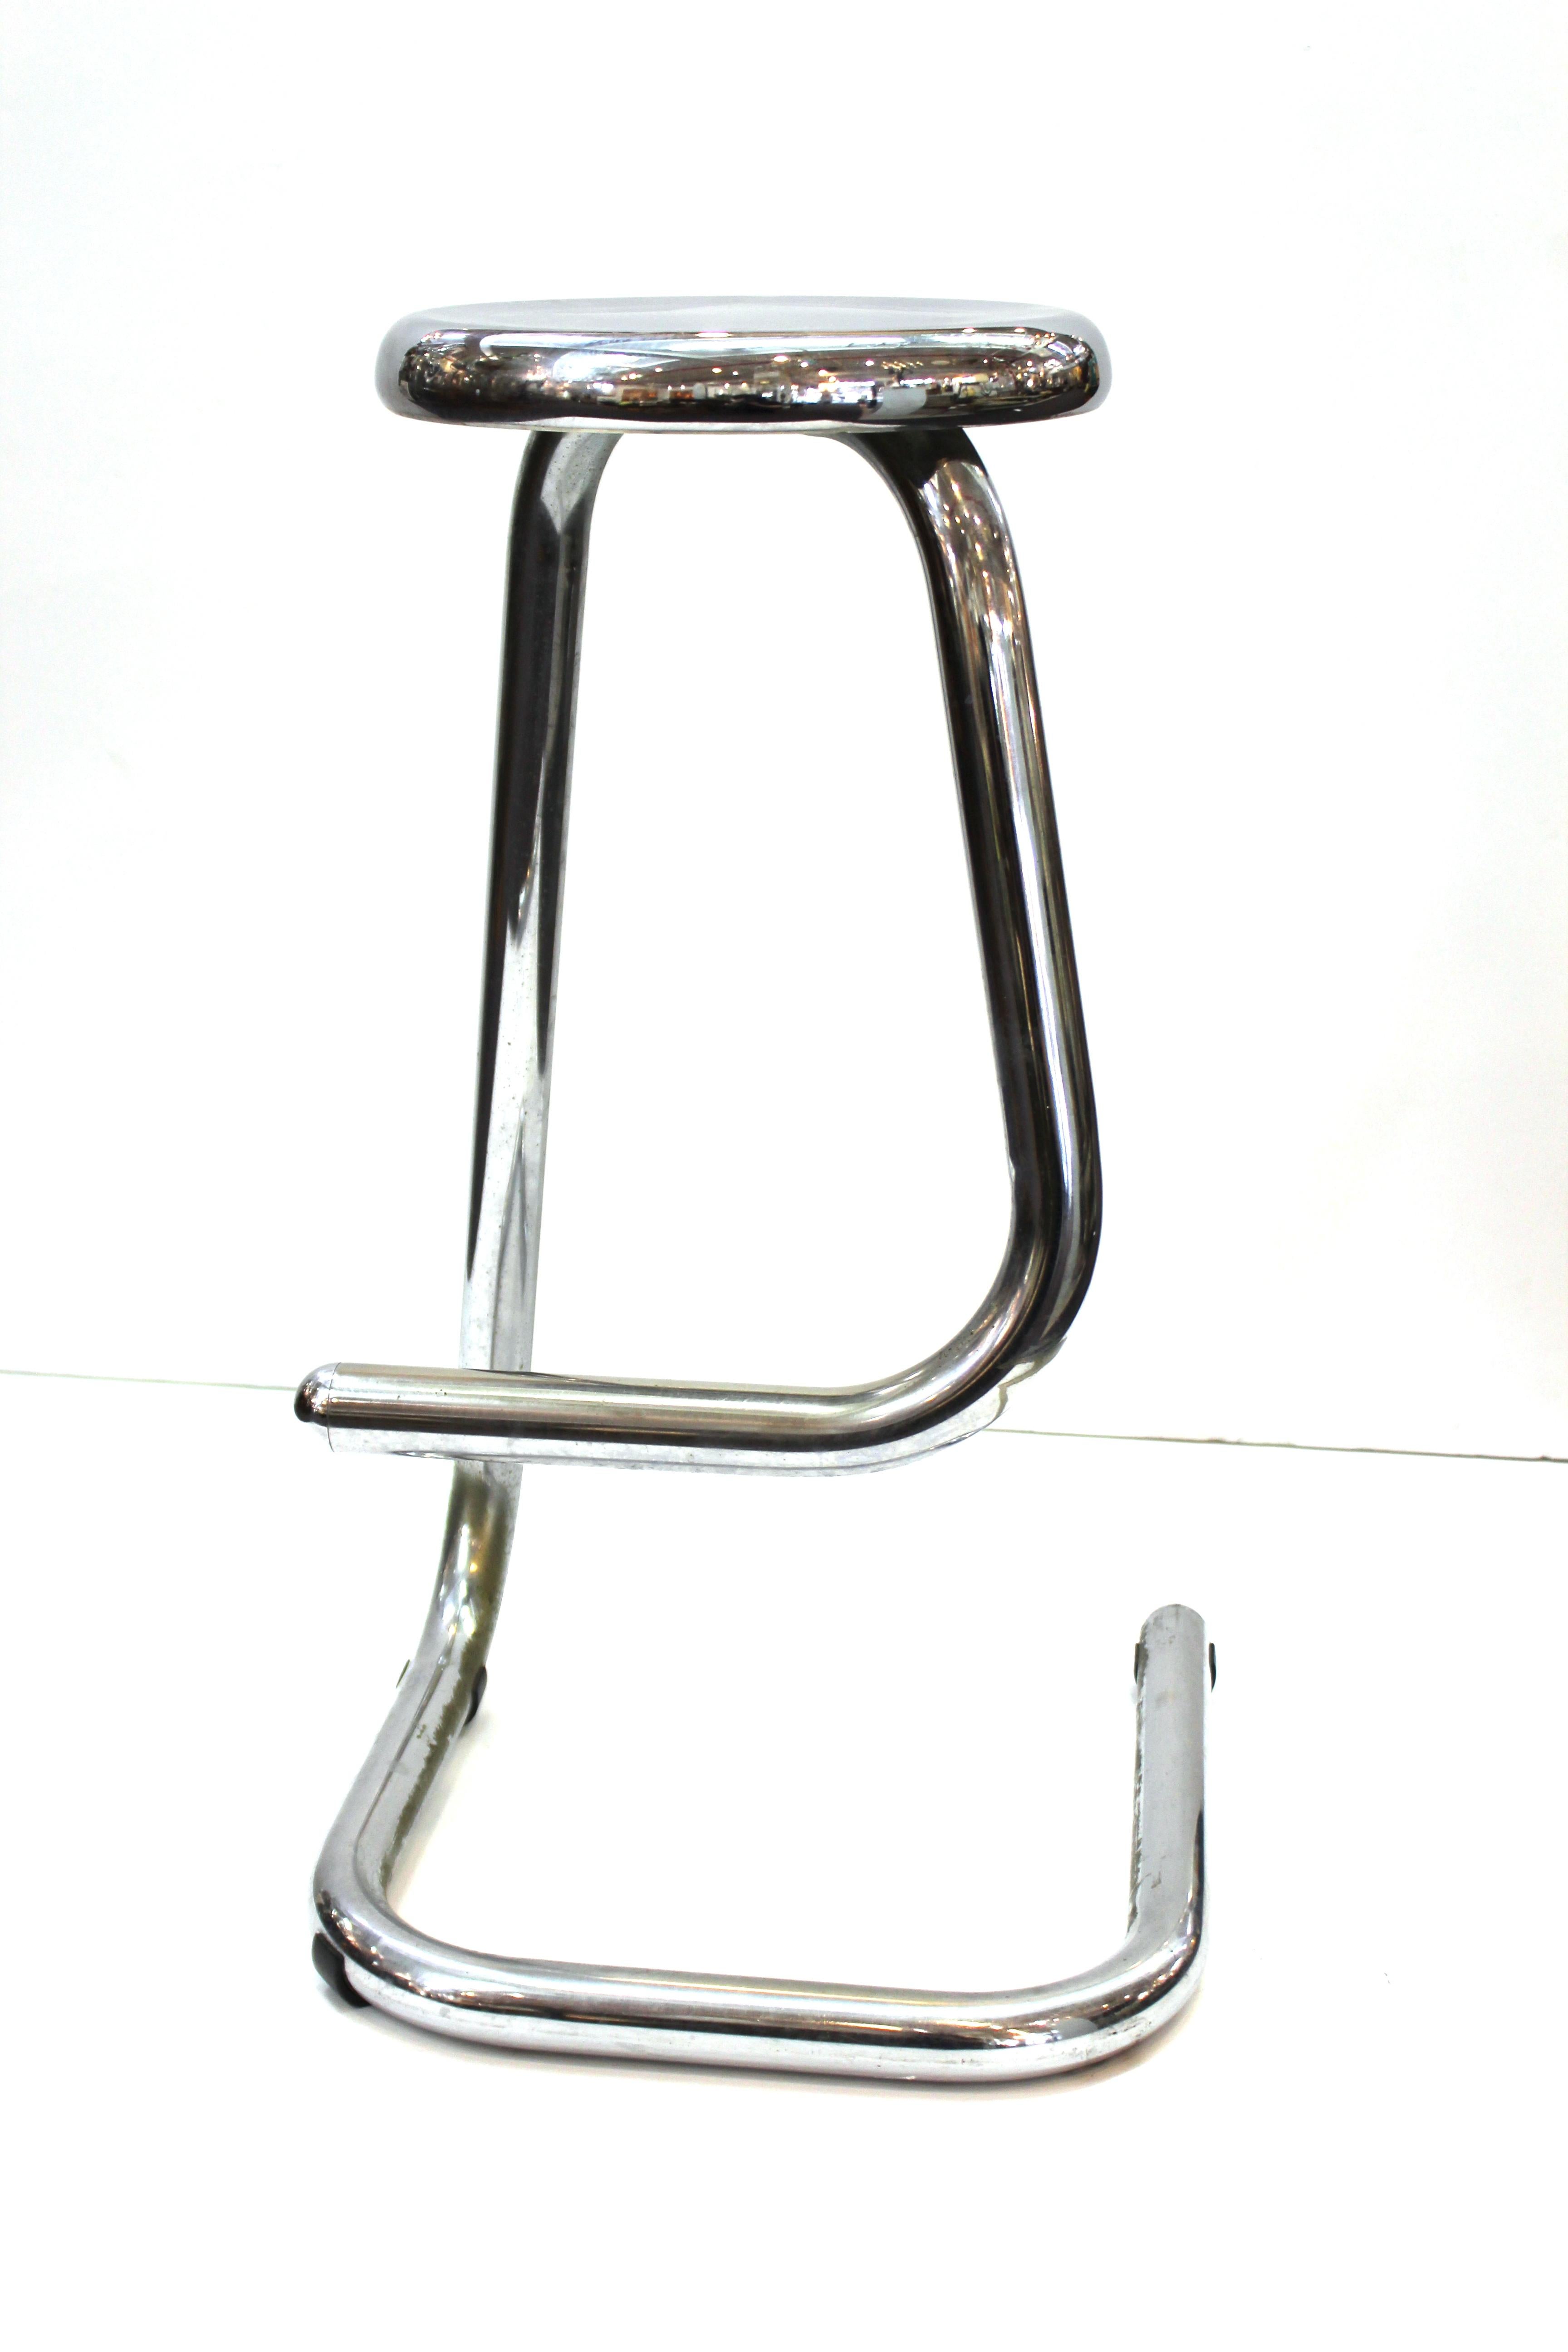 Canadian modern steel paperclip 'K700' stools designed by Hugh Hamilton & Philip Salmon for Kinetics Furniture in Canada. The pair was made in the 1970s and is in great vintage condition with age-appropriate wear and use. One of the bottom plastic